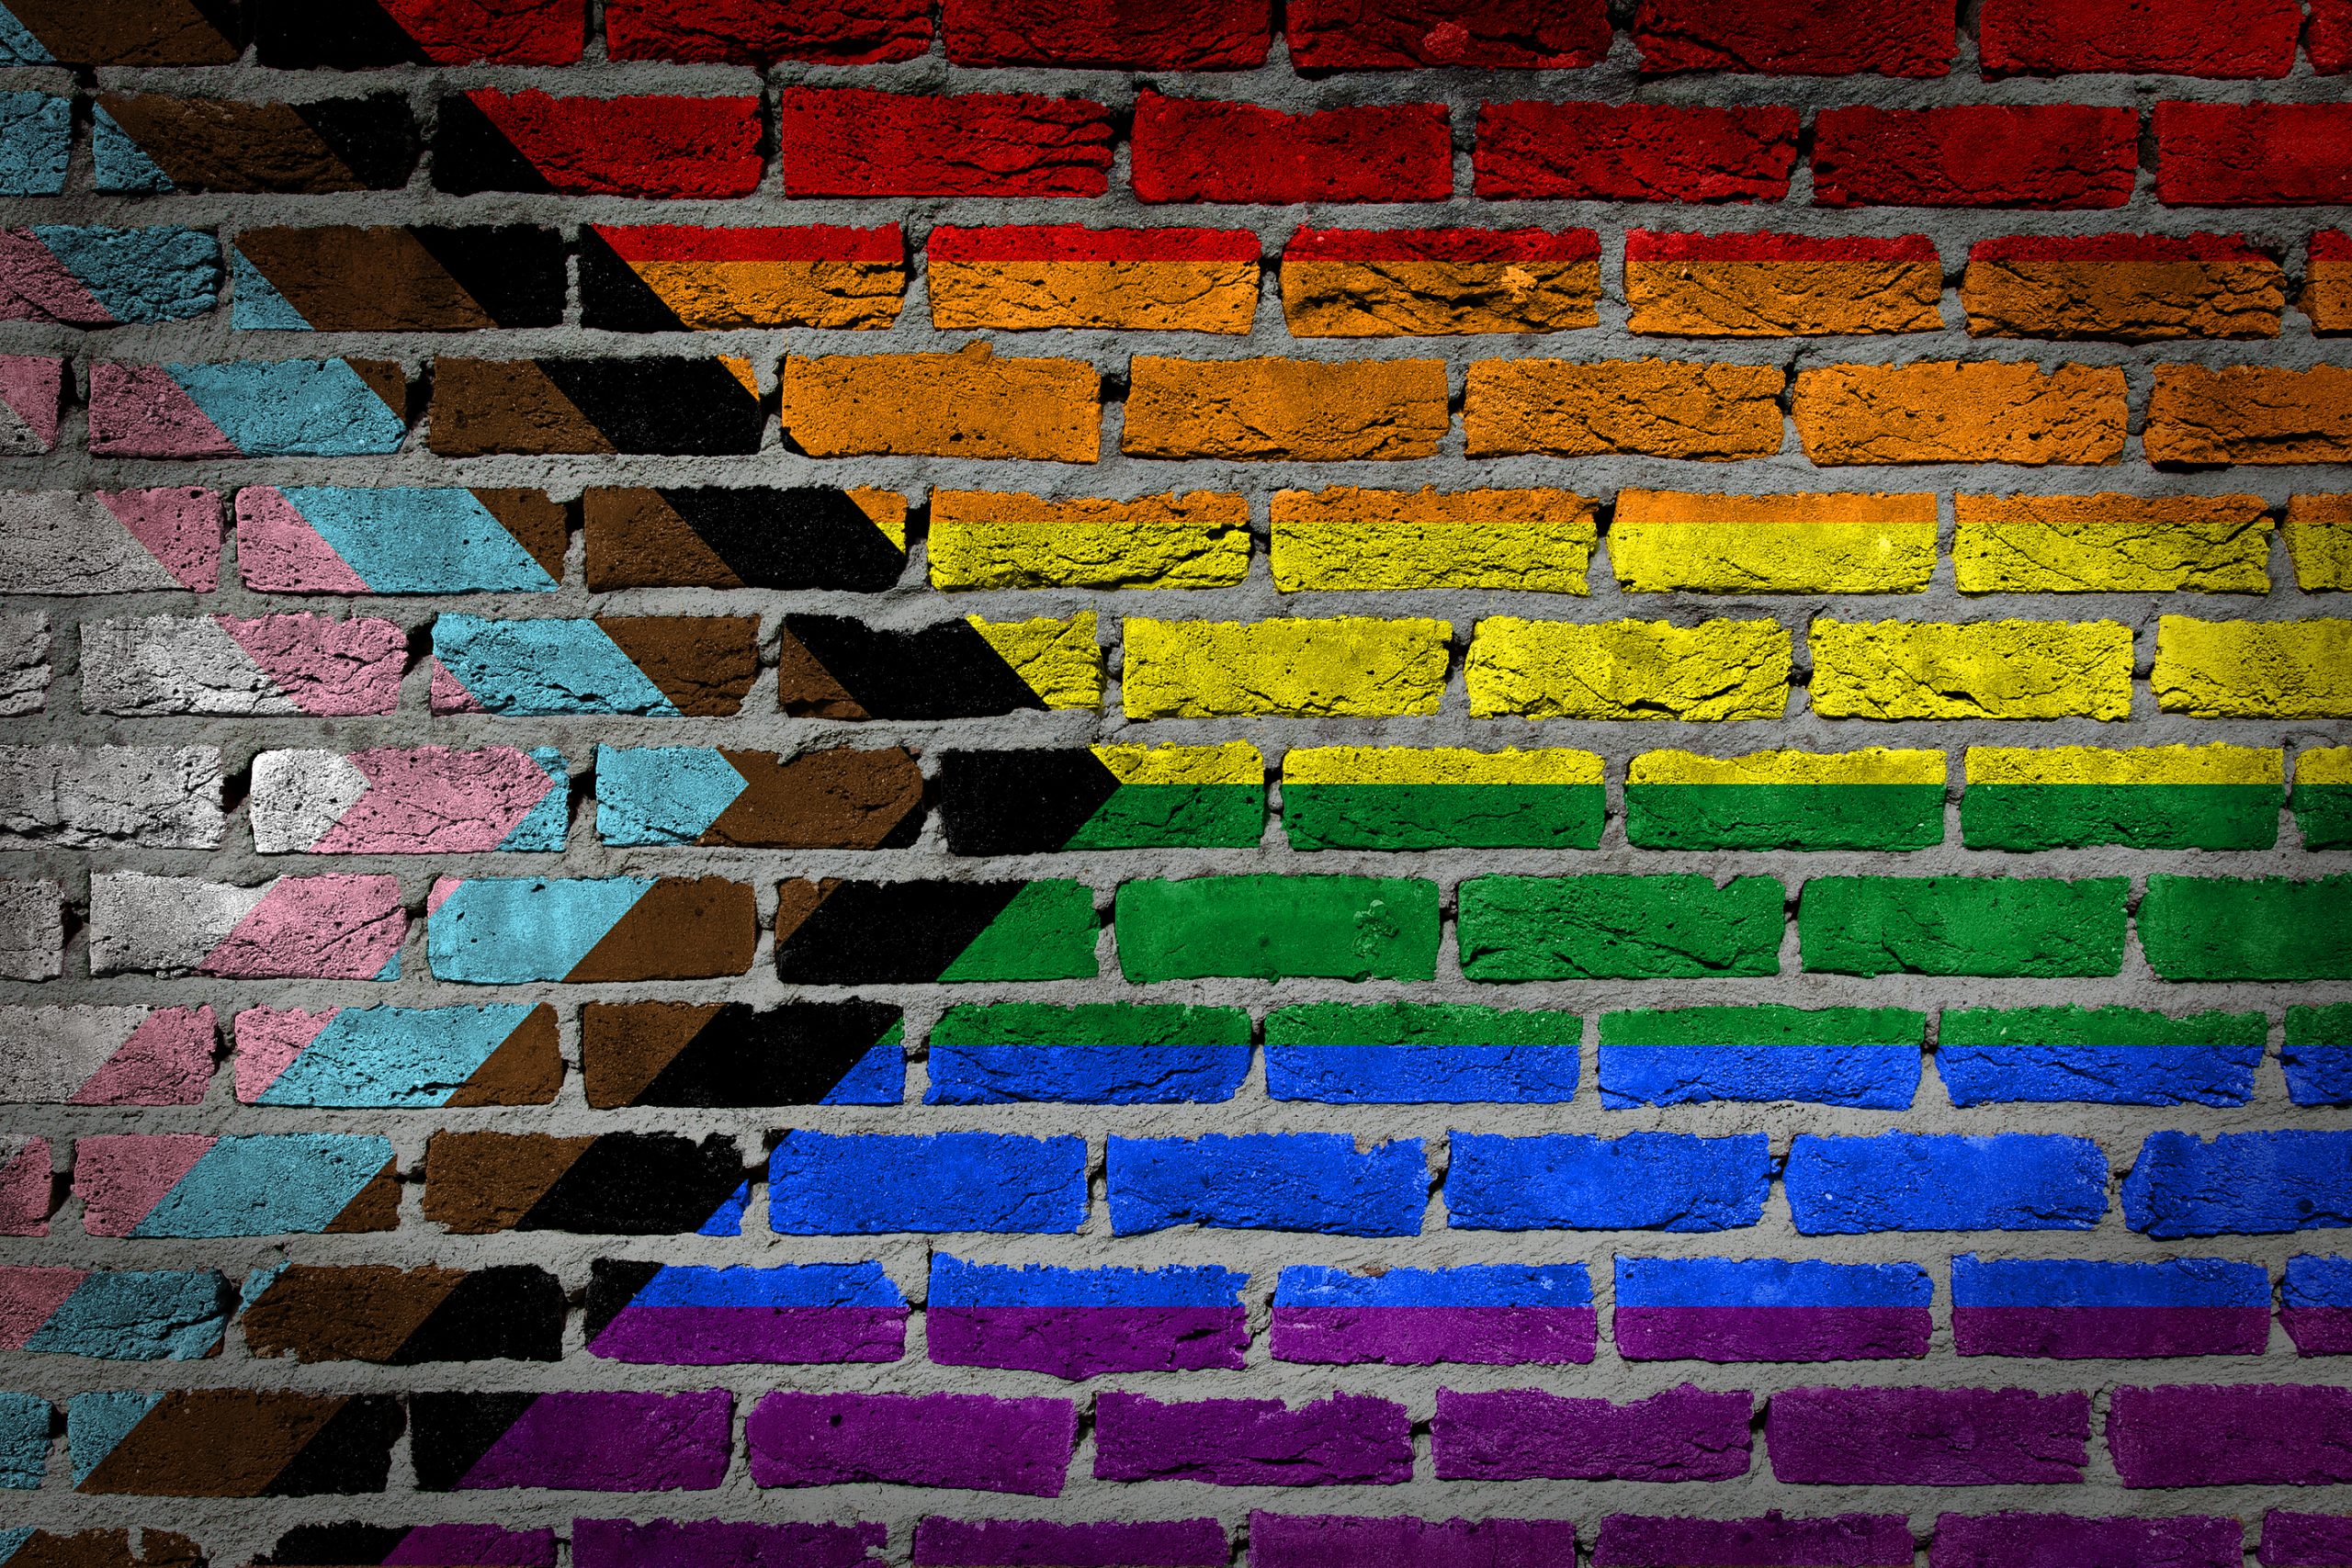 How LGBT rights came to Ontario